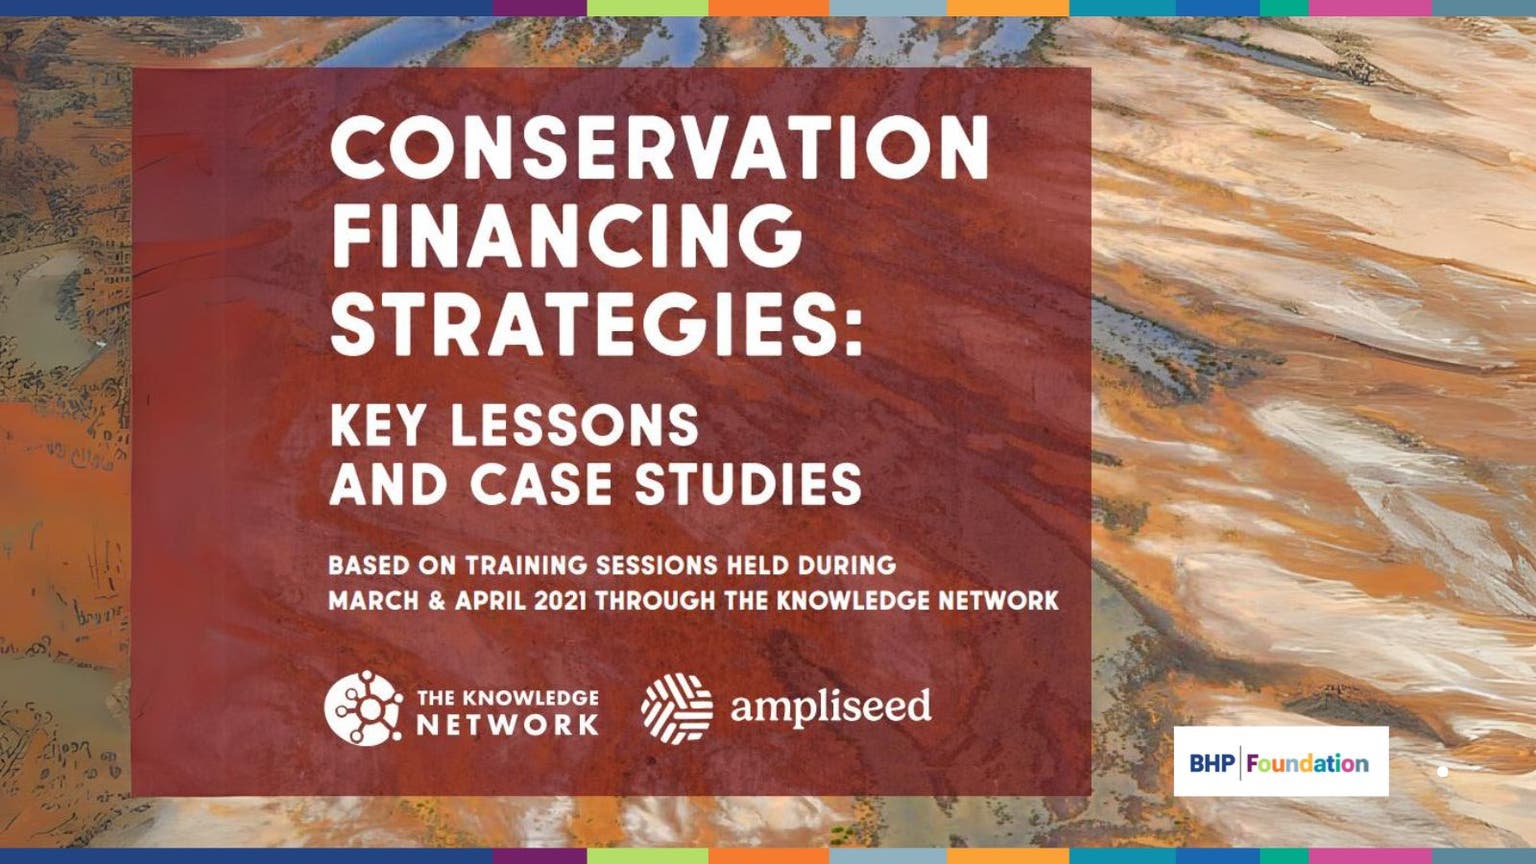 BHP_Foundation_Conservation_Financing_Strategies_Key_Lessons_and_Case_Studies_report_English.jpg